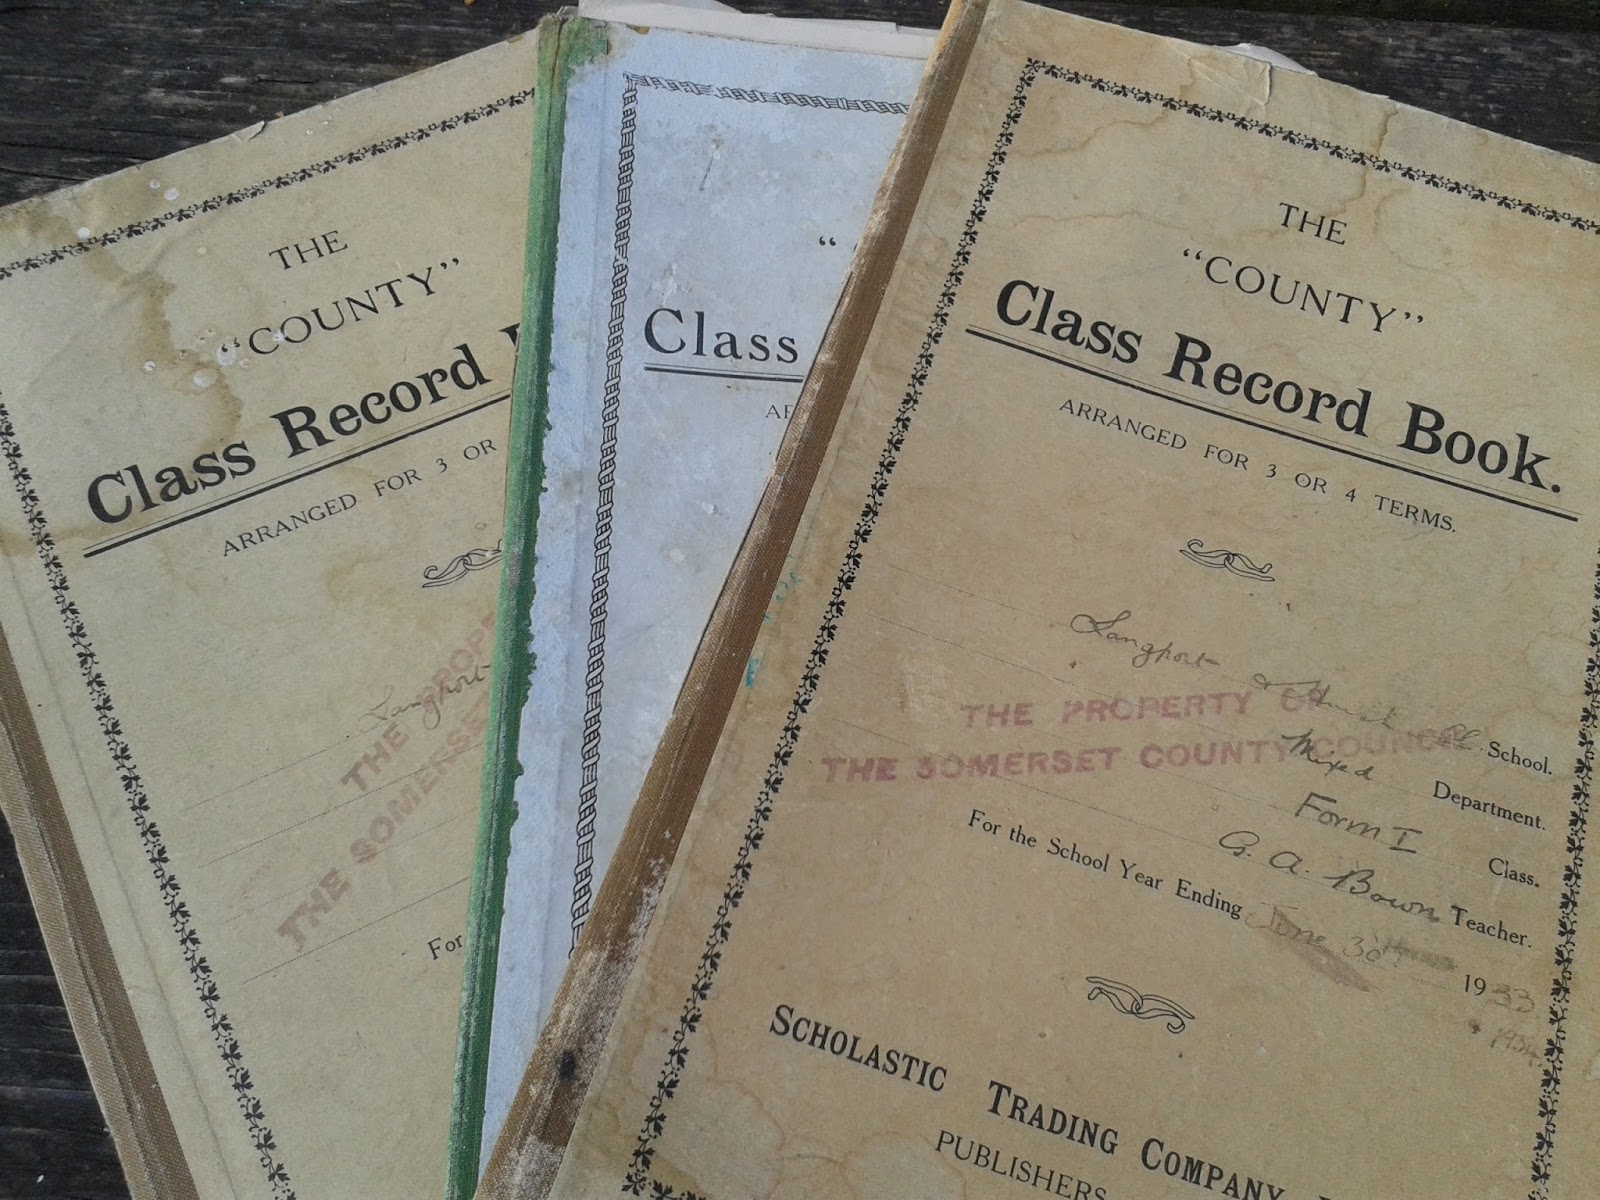 The County Class Record Book